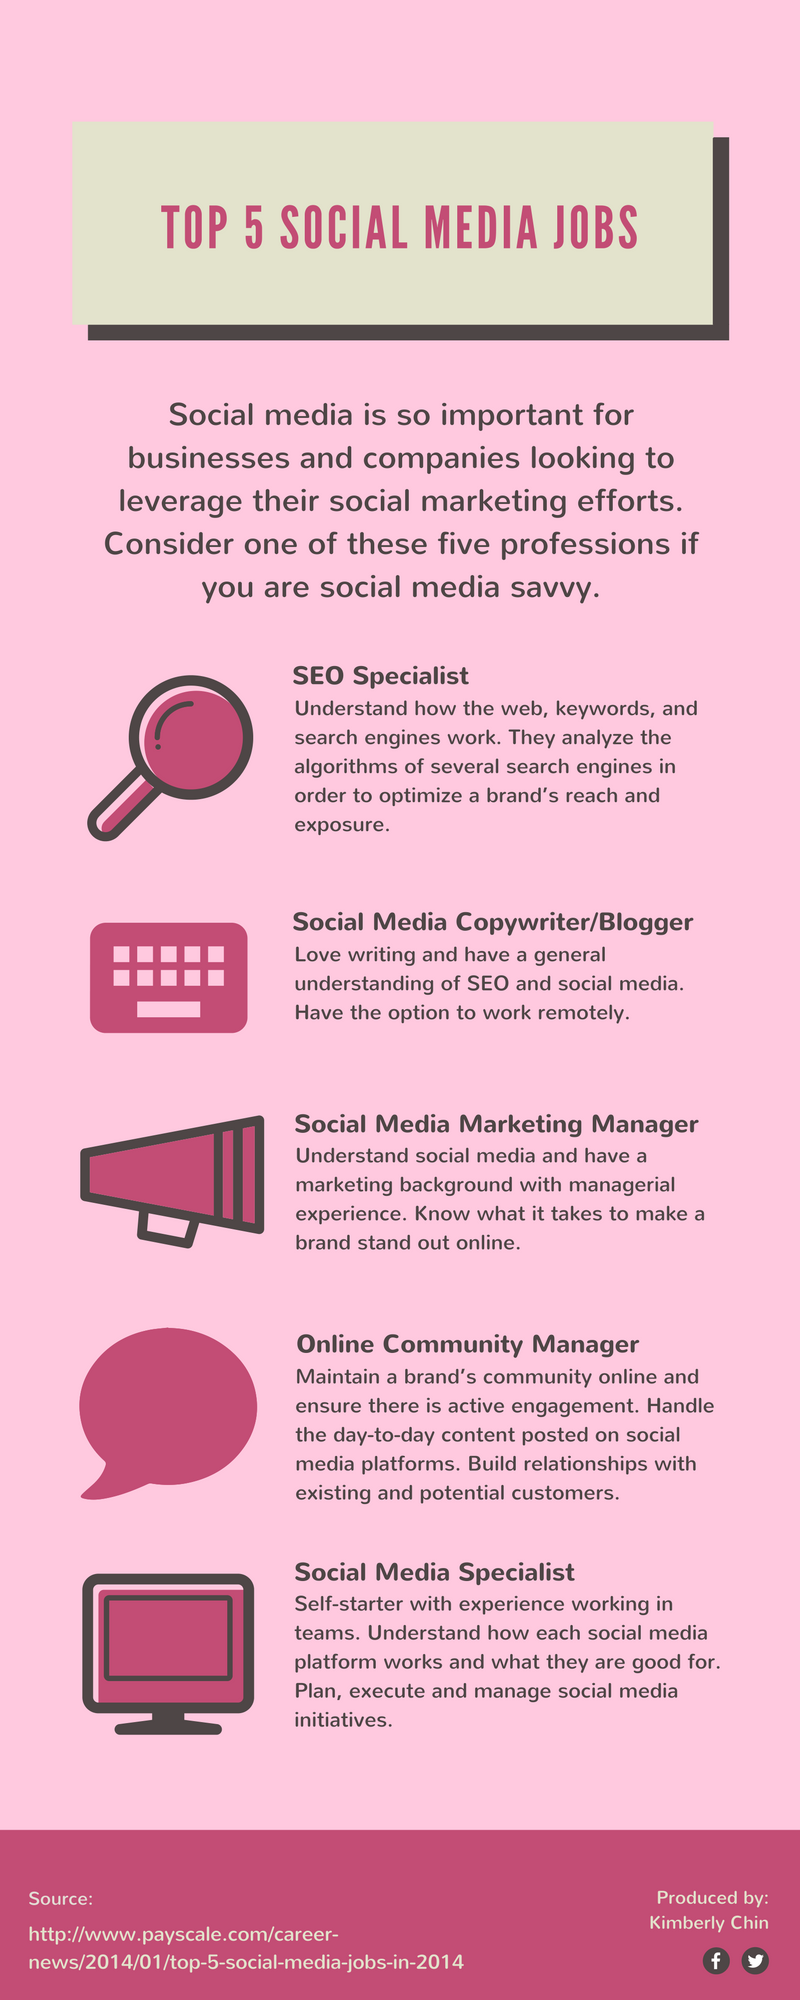 Social Media Manager for Beginners (No Experience - Online Jobs) 